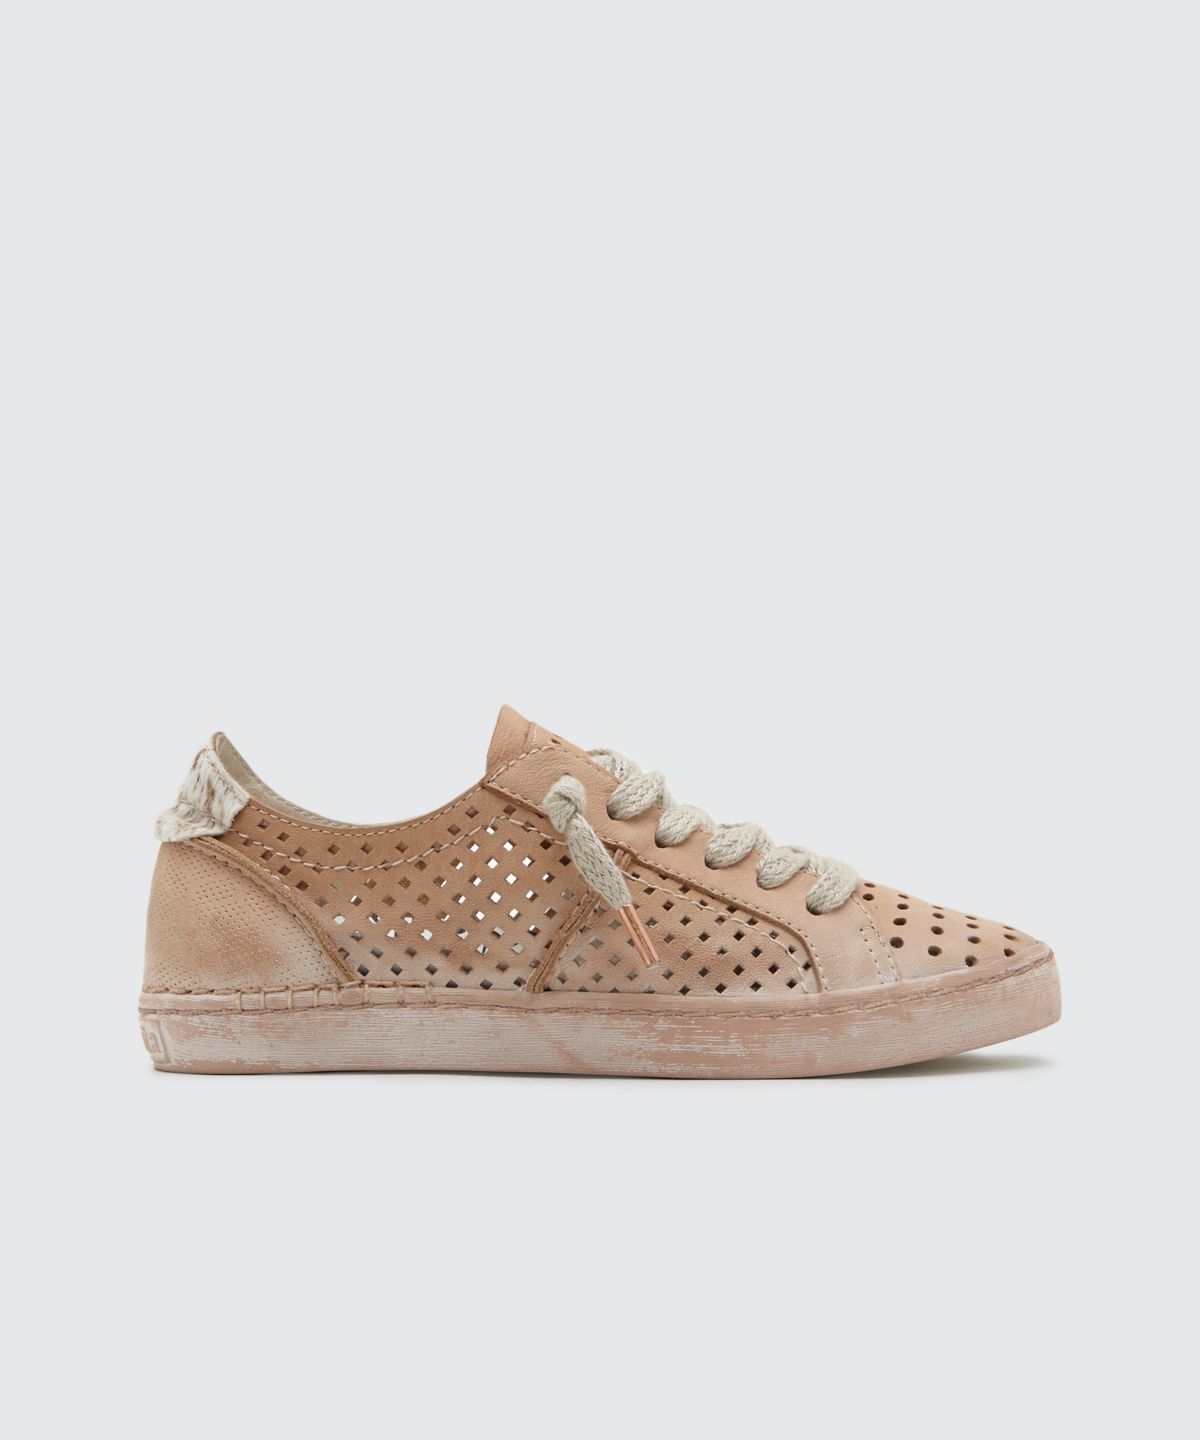 blush pink perforated sneakers